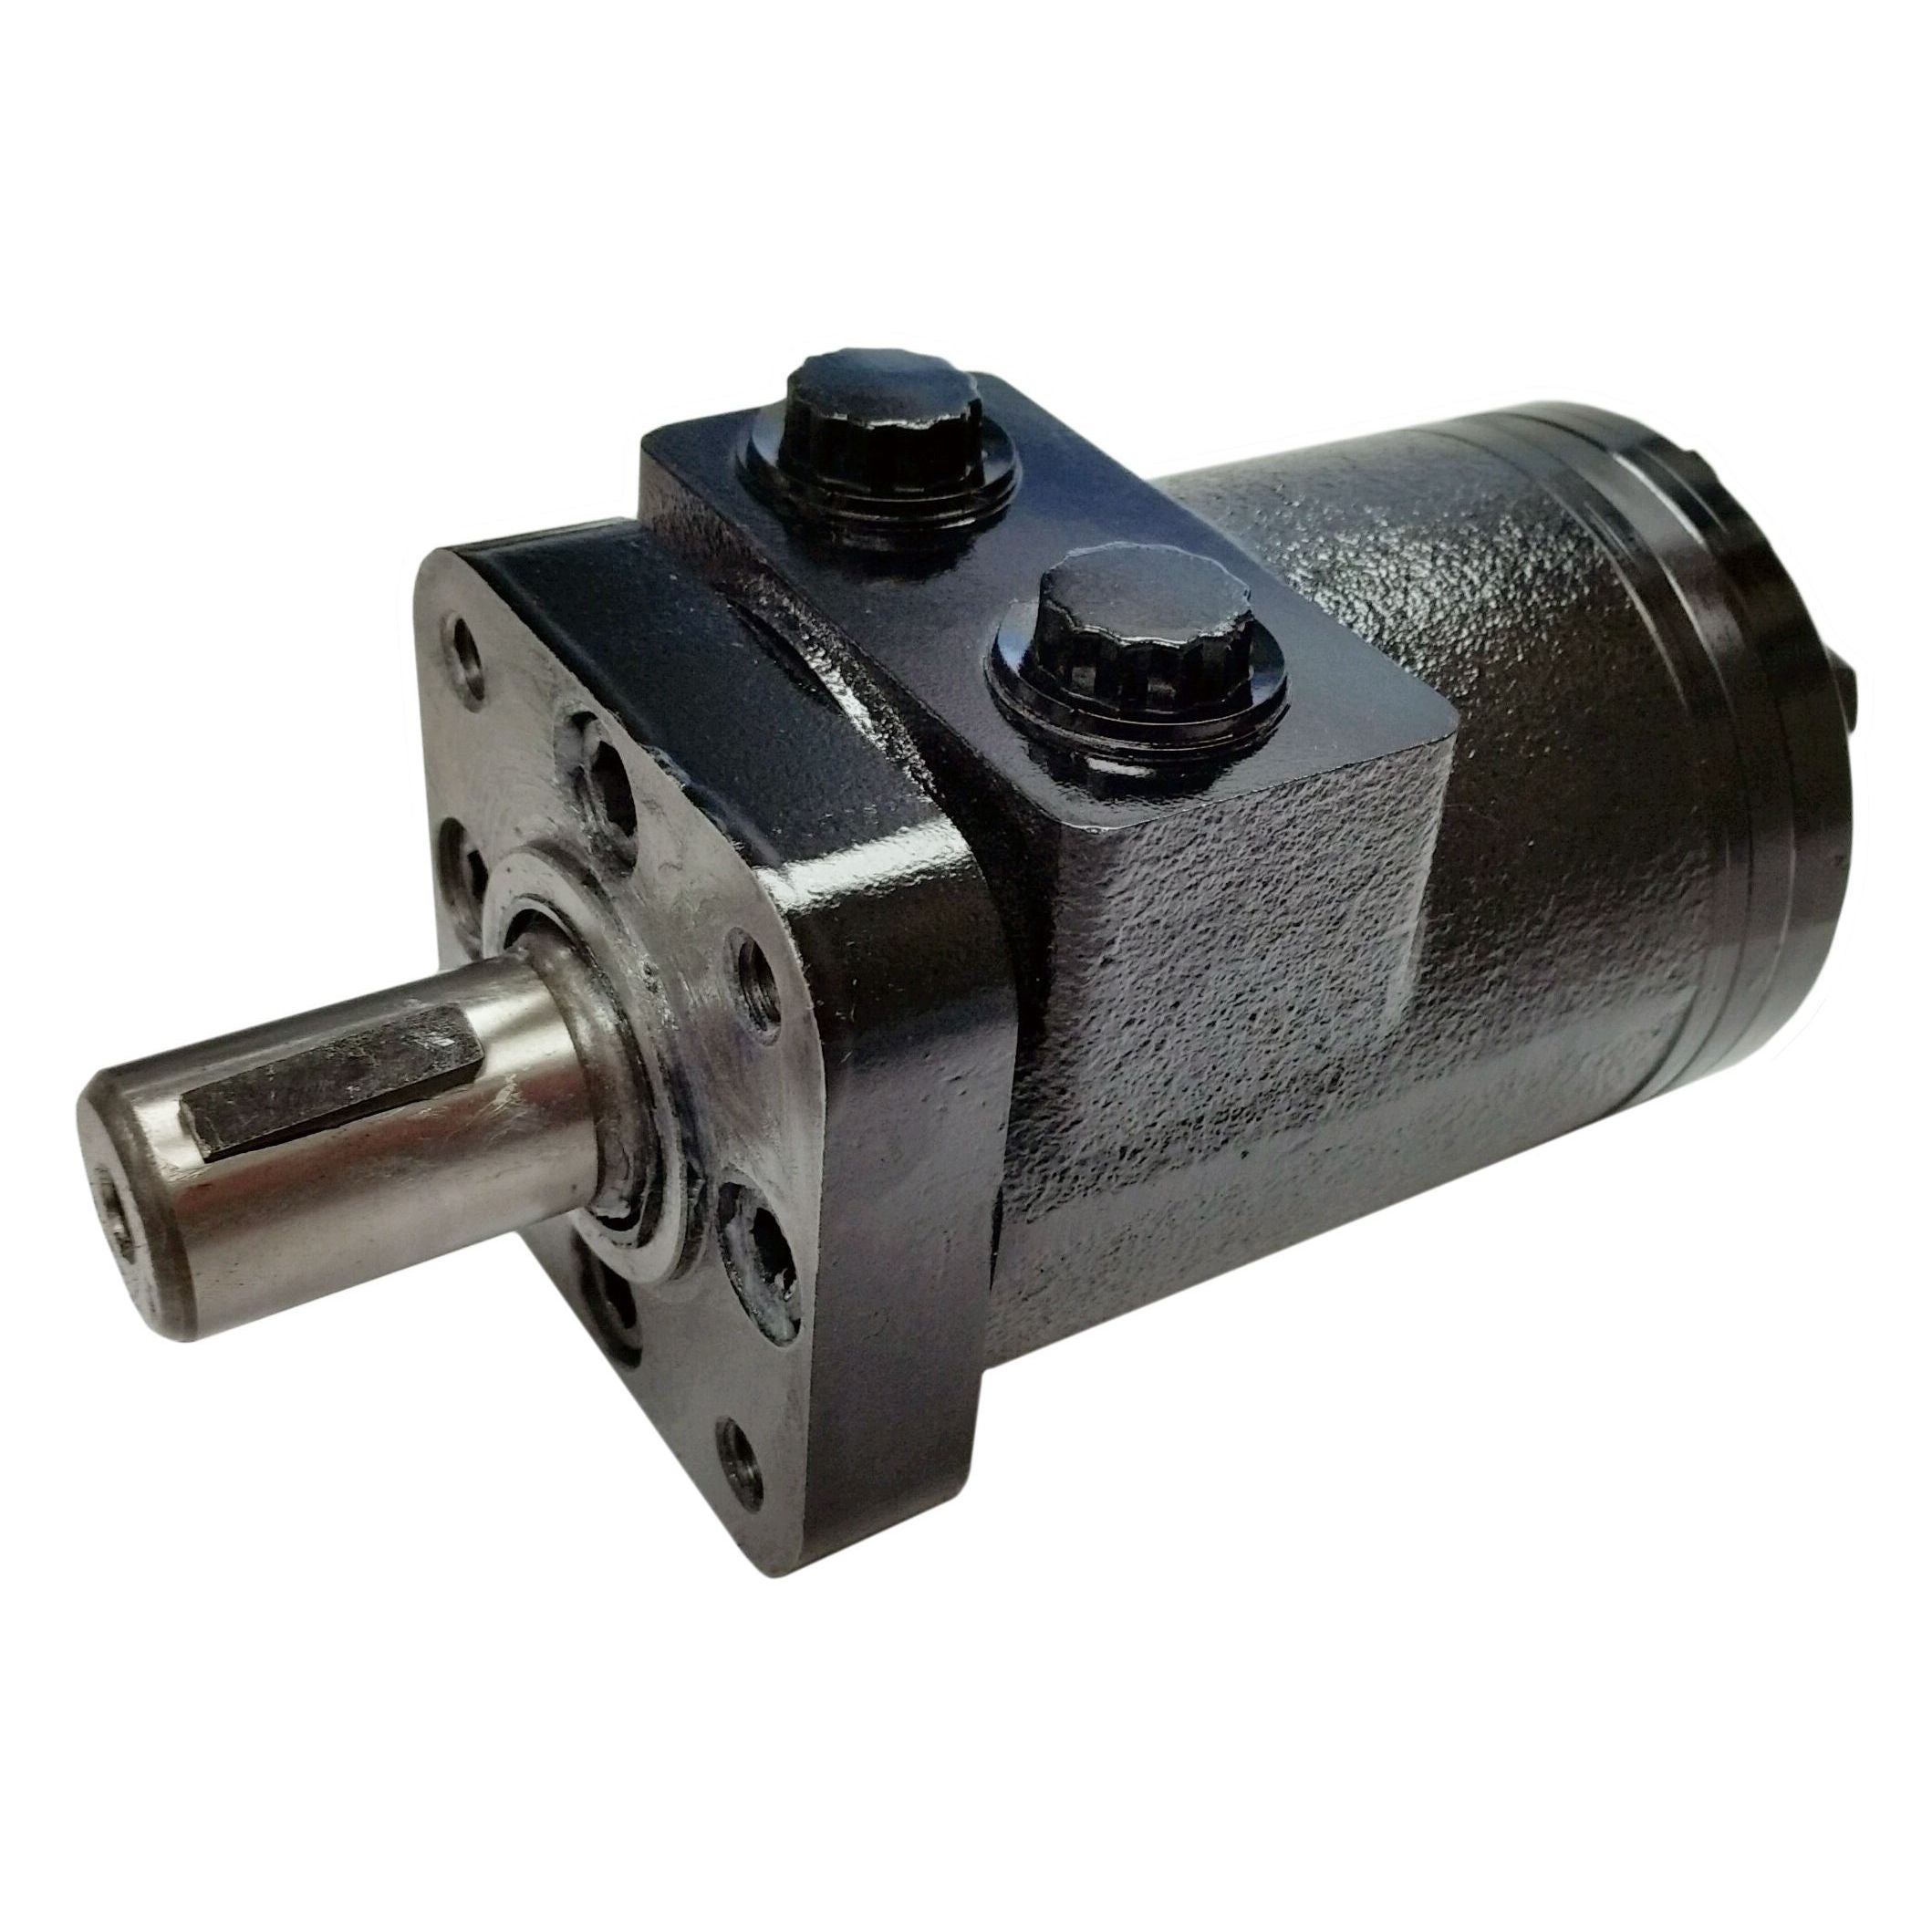 BMPH-315-H4-K-P : Dynamic LSHT Motor, 315cc, 192RPM, 3319in-lb, 1813psi Differential, 15.85GPM, SAE A 4-Bolt Mount, 1" Bore x 1/4" Key Shaft, Side Ported, 1/2" NPT